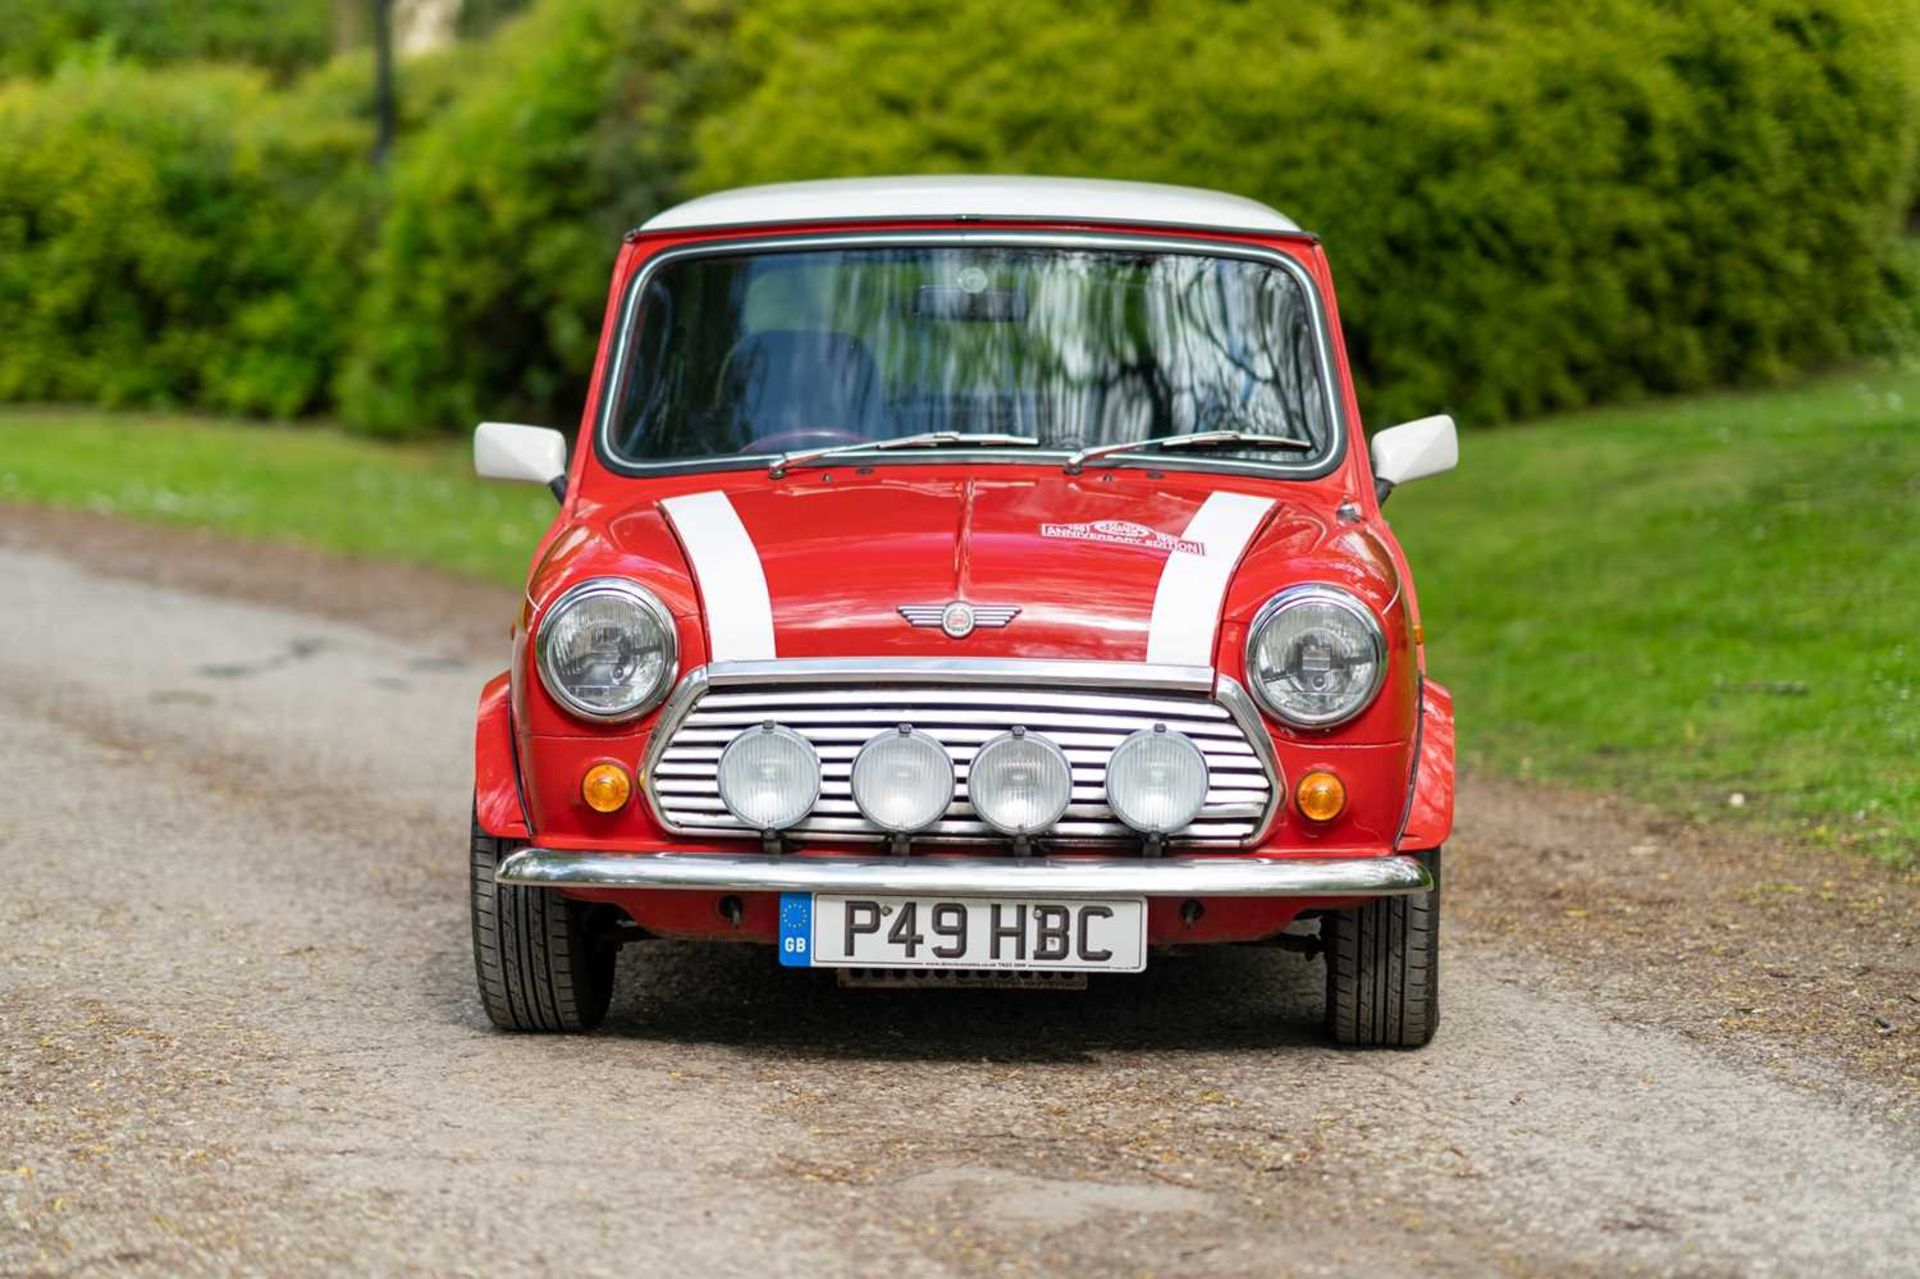 1996 Rover Mini Cooper - 35th Anniversary Edition Factory fitted air conditioning  - Image 9 of 58